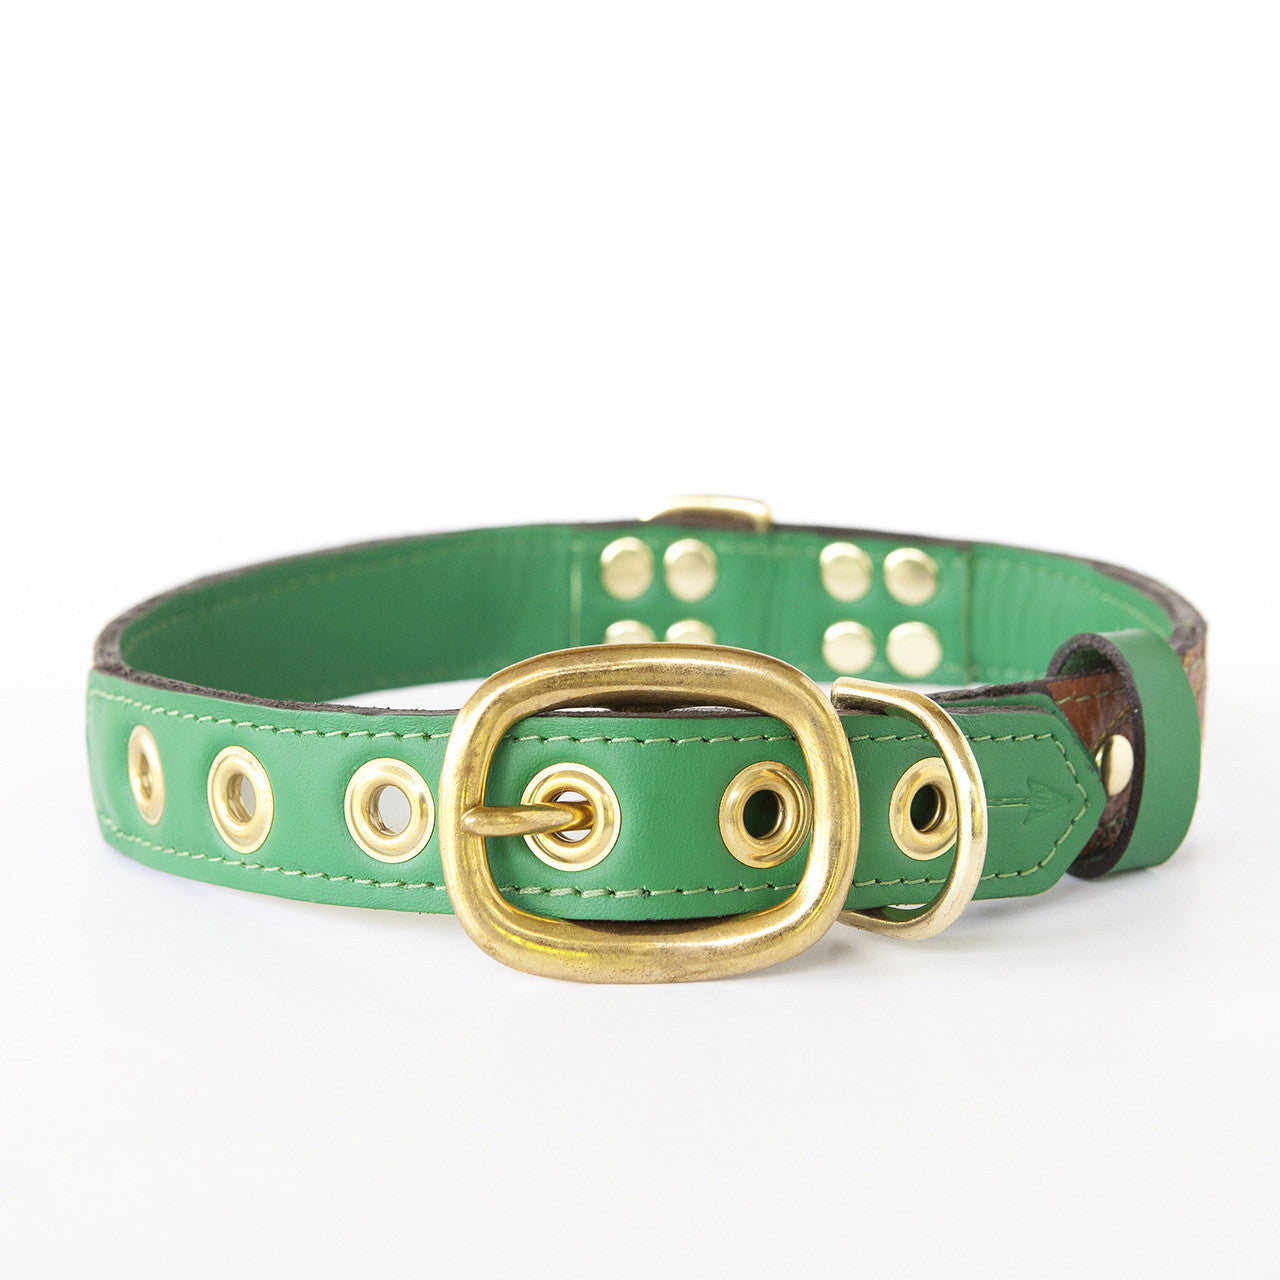 Emerald Green Dog Collar with Brown Leather + Green and Yellow Stitching (back view)